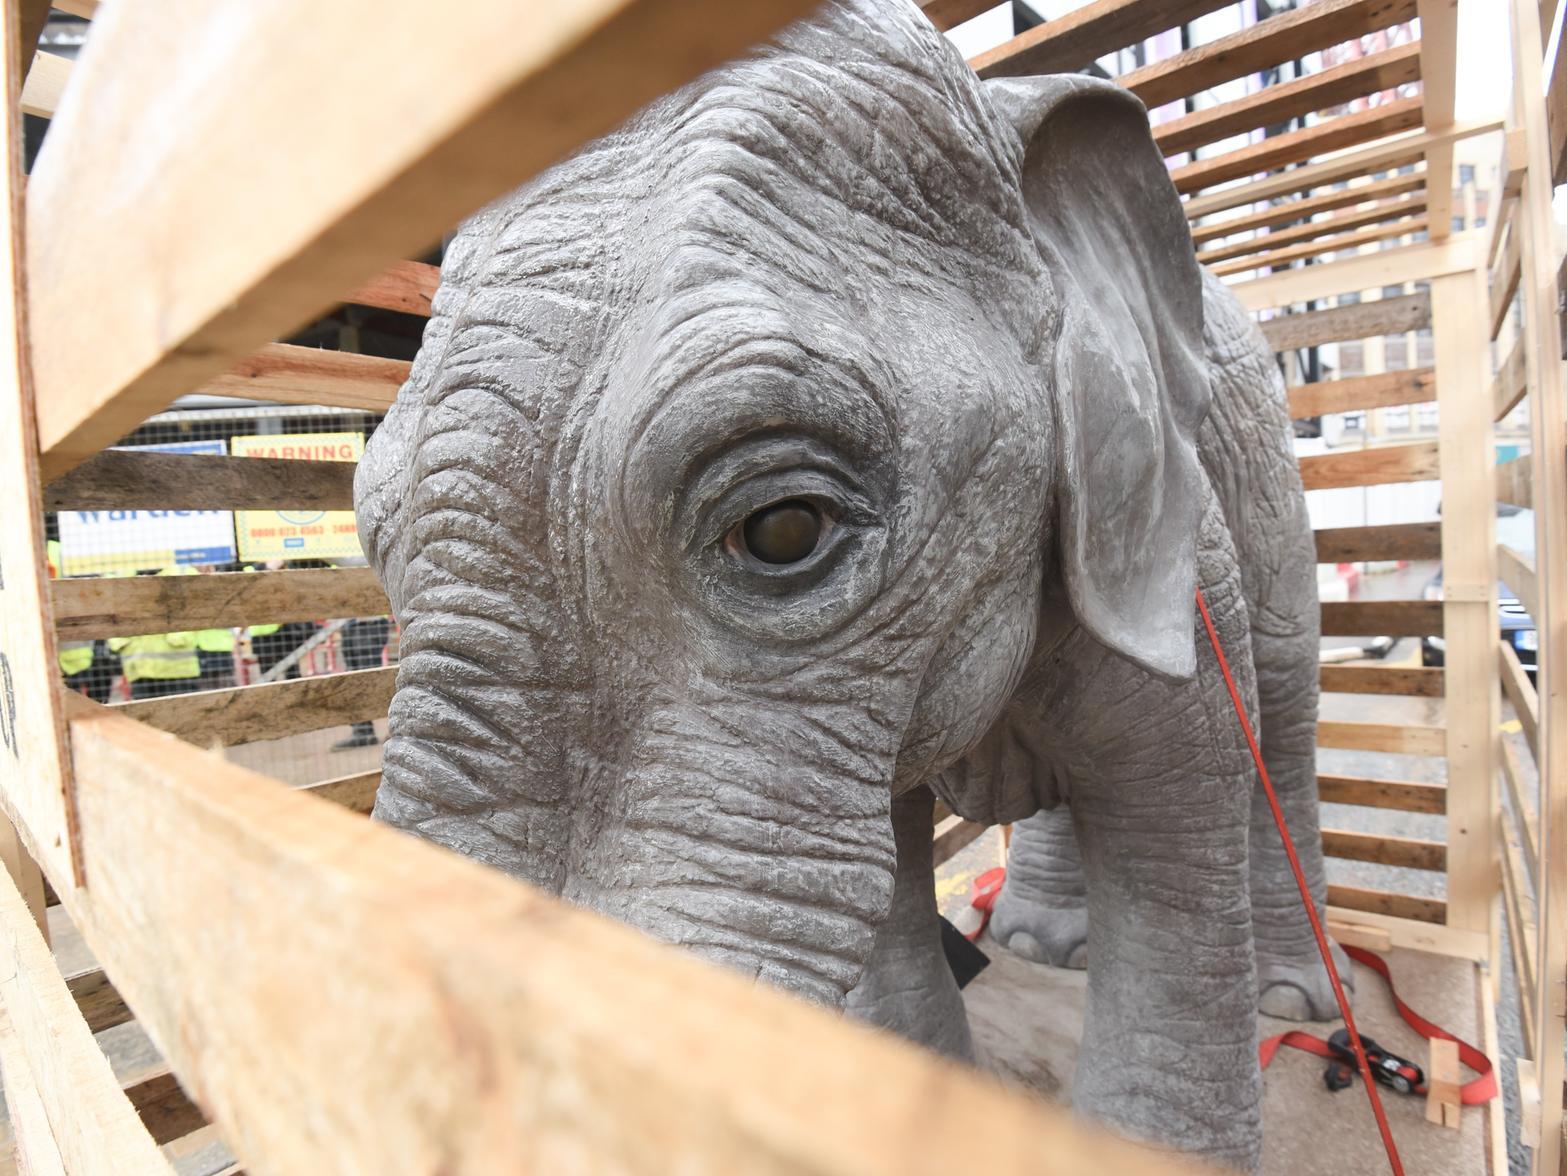 The fibreglass elephant arrived in a crate